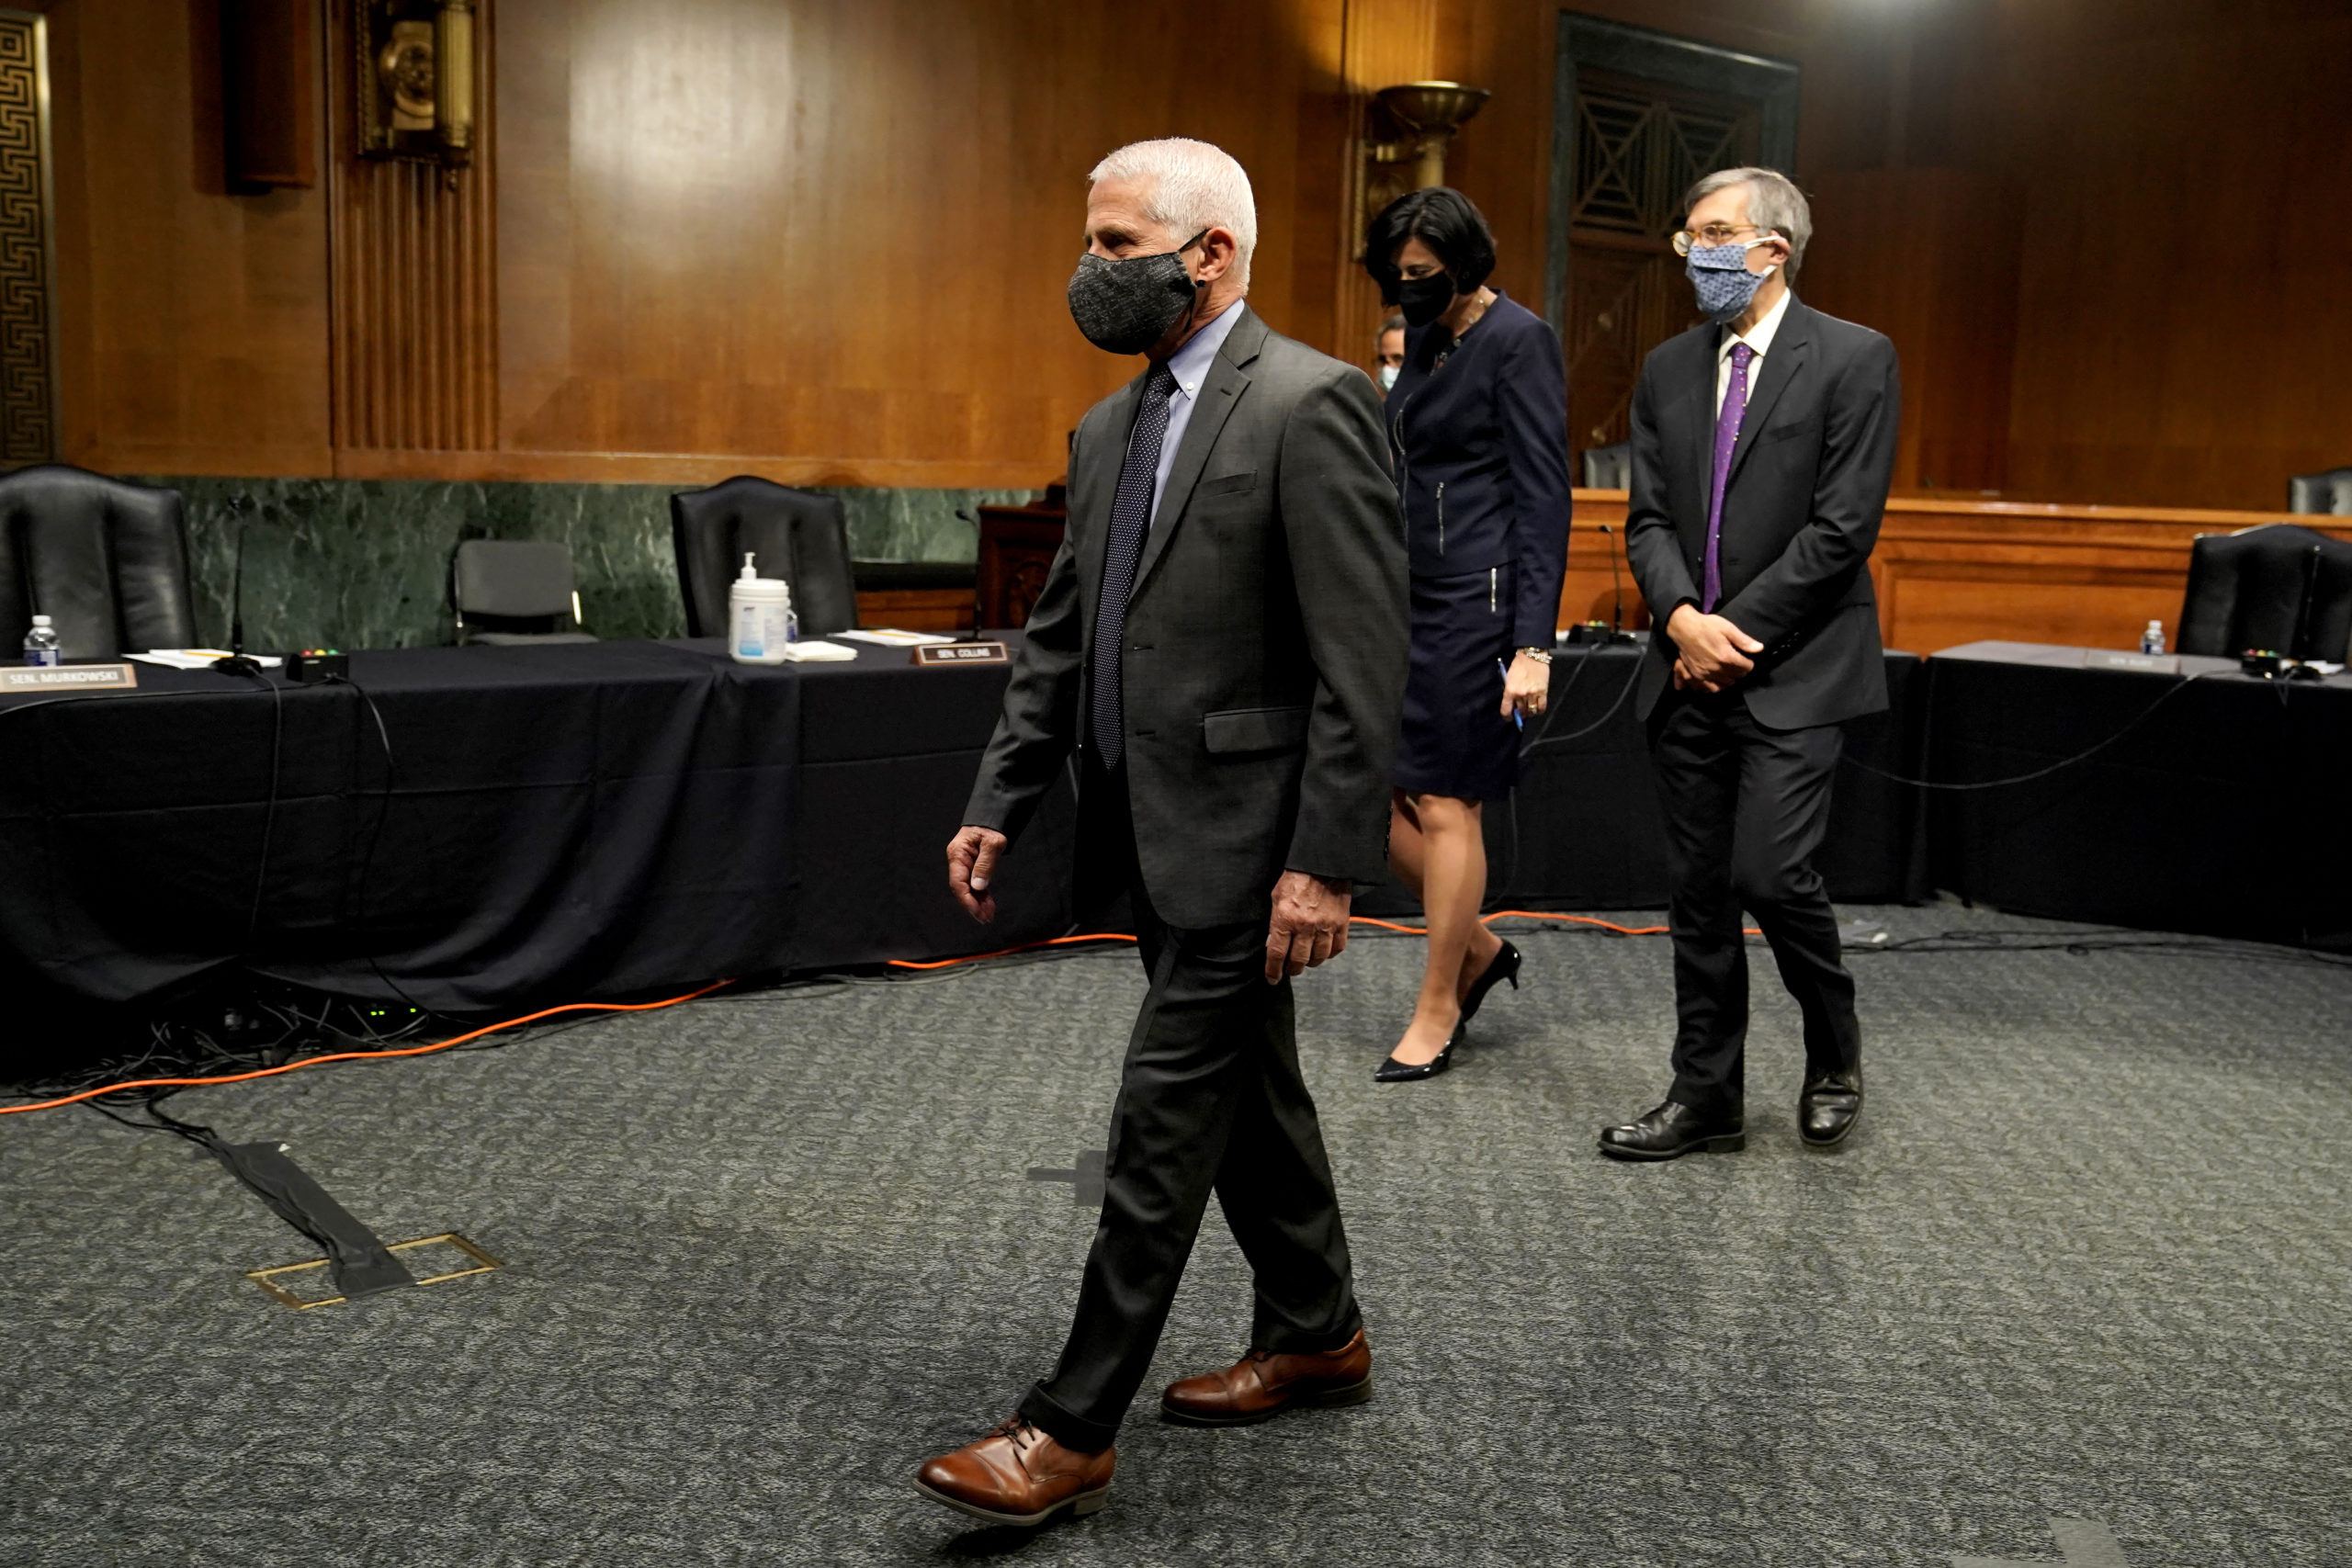 Anthony Fauci, director of the National Institute of Allergy and Infectious Diseases, arrives for a Senate hearing on May 11. (Greg Nash/Pool/Getty Images)